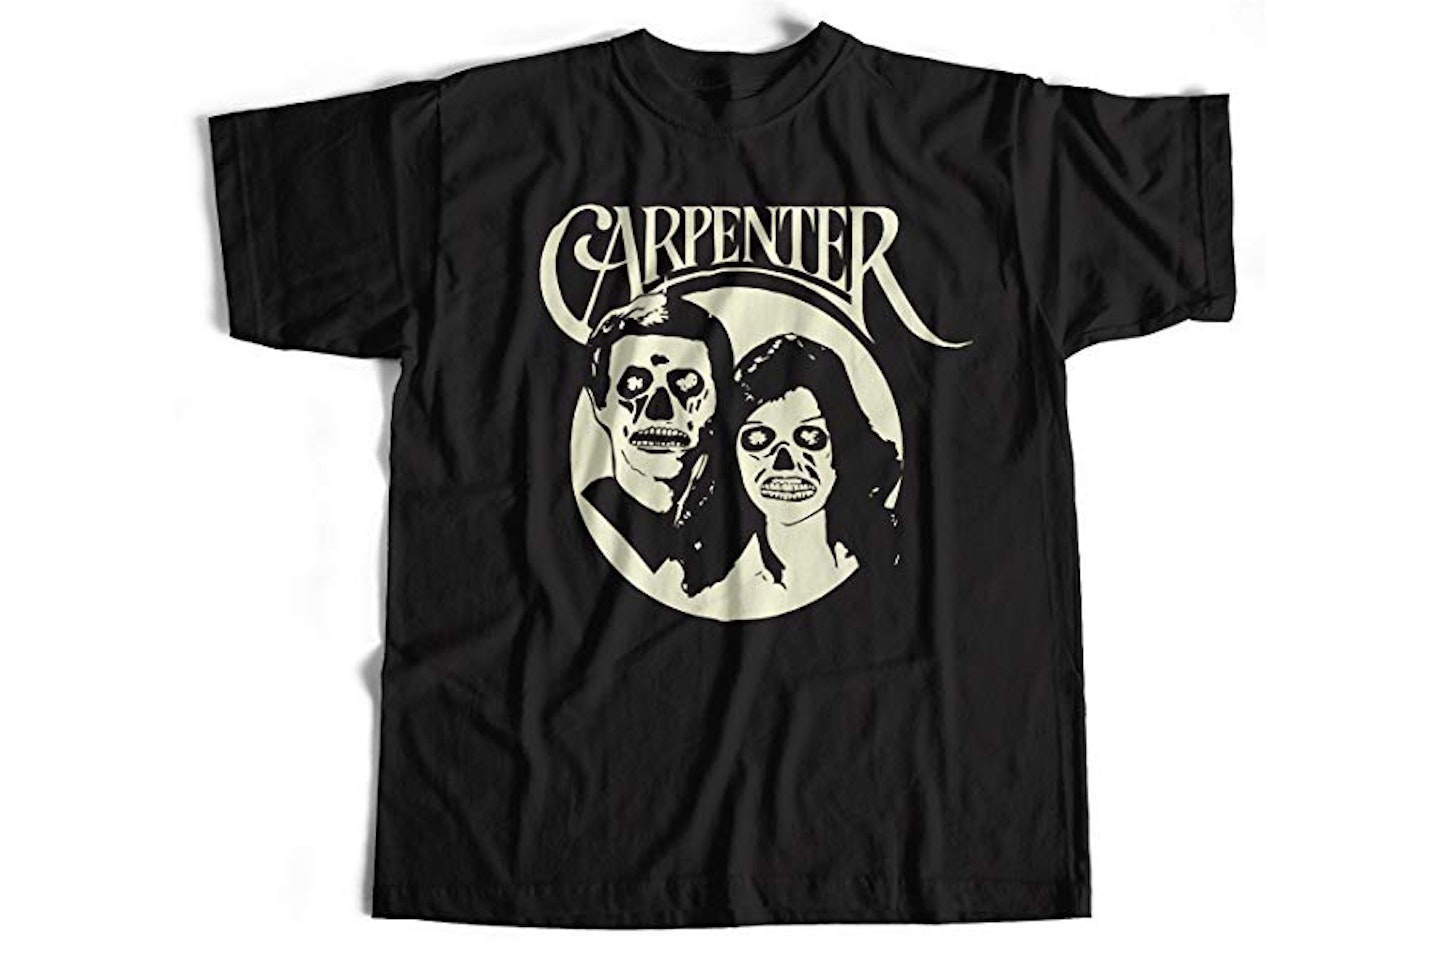 They Live Carpenters